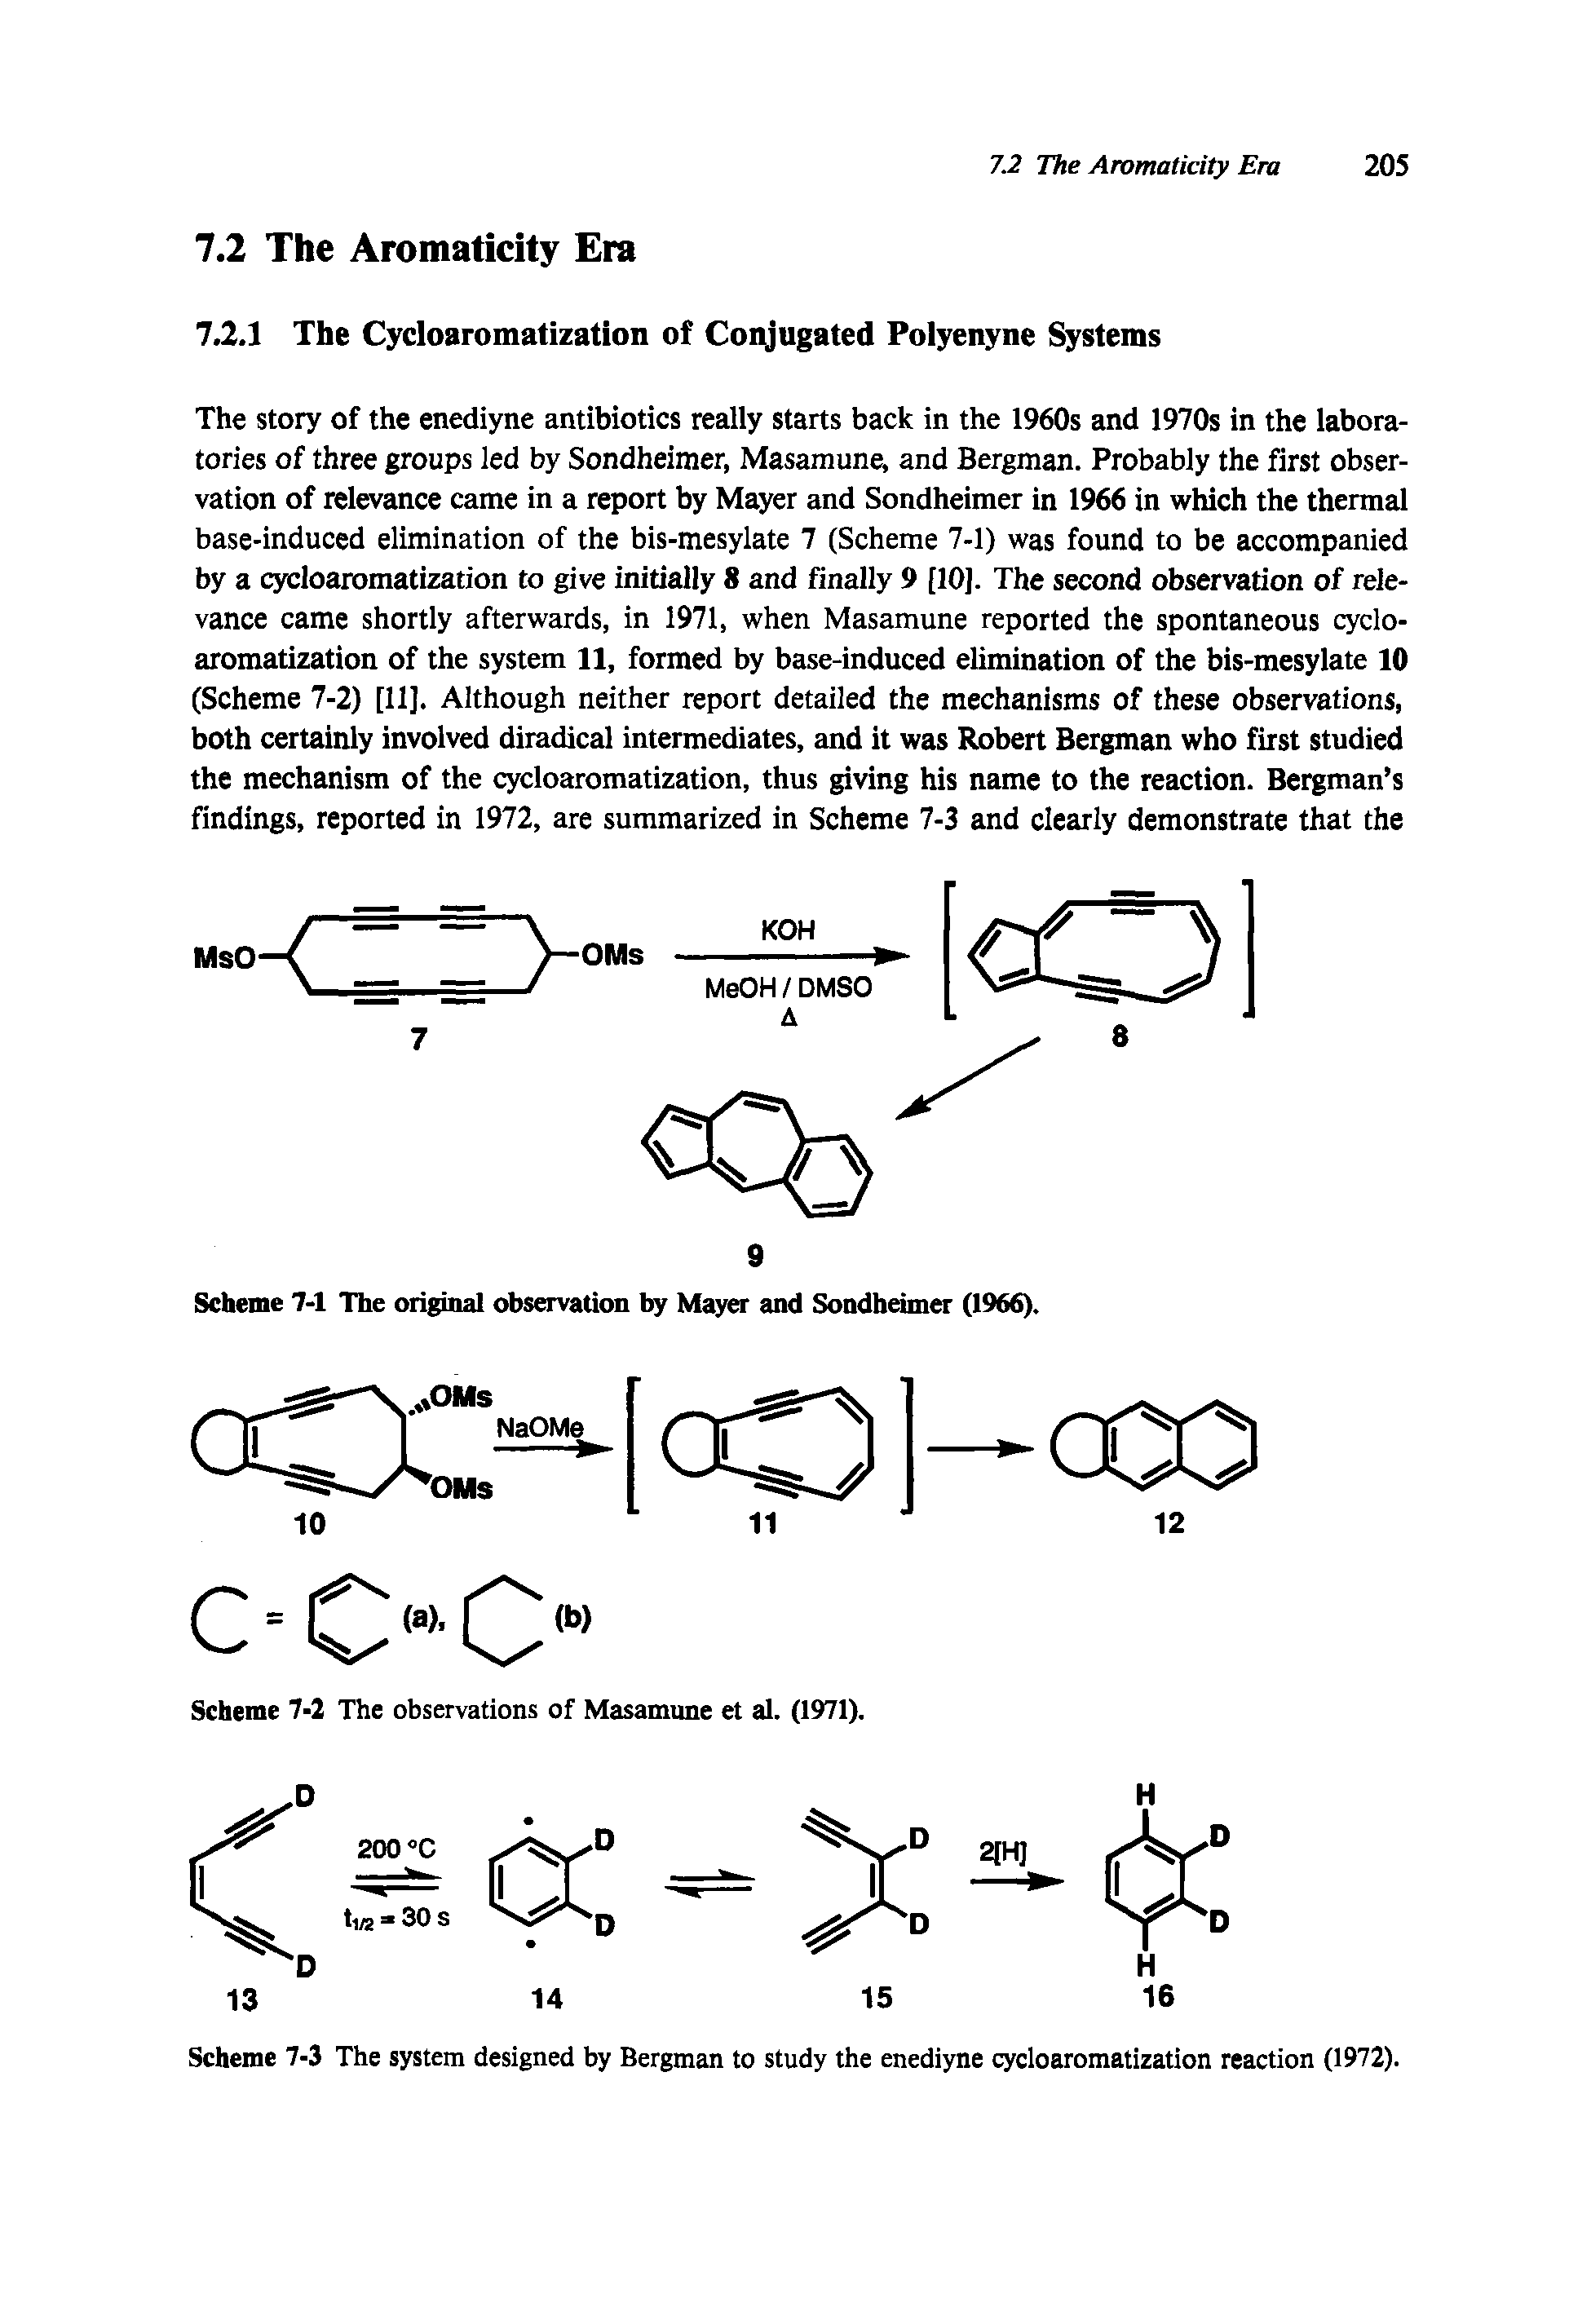 Scheme 7-3 The system designed by Bergman to study the enediyne cycloaromatization reaction (1972).